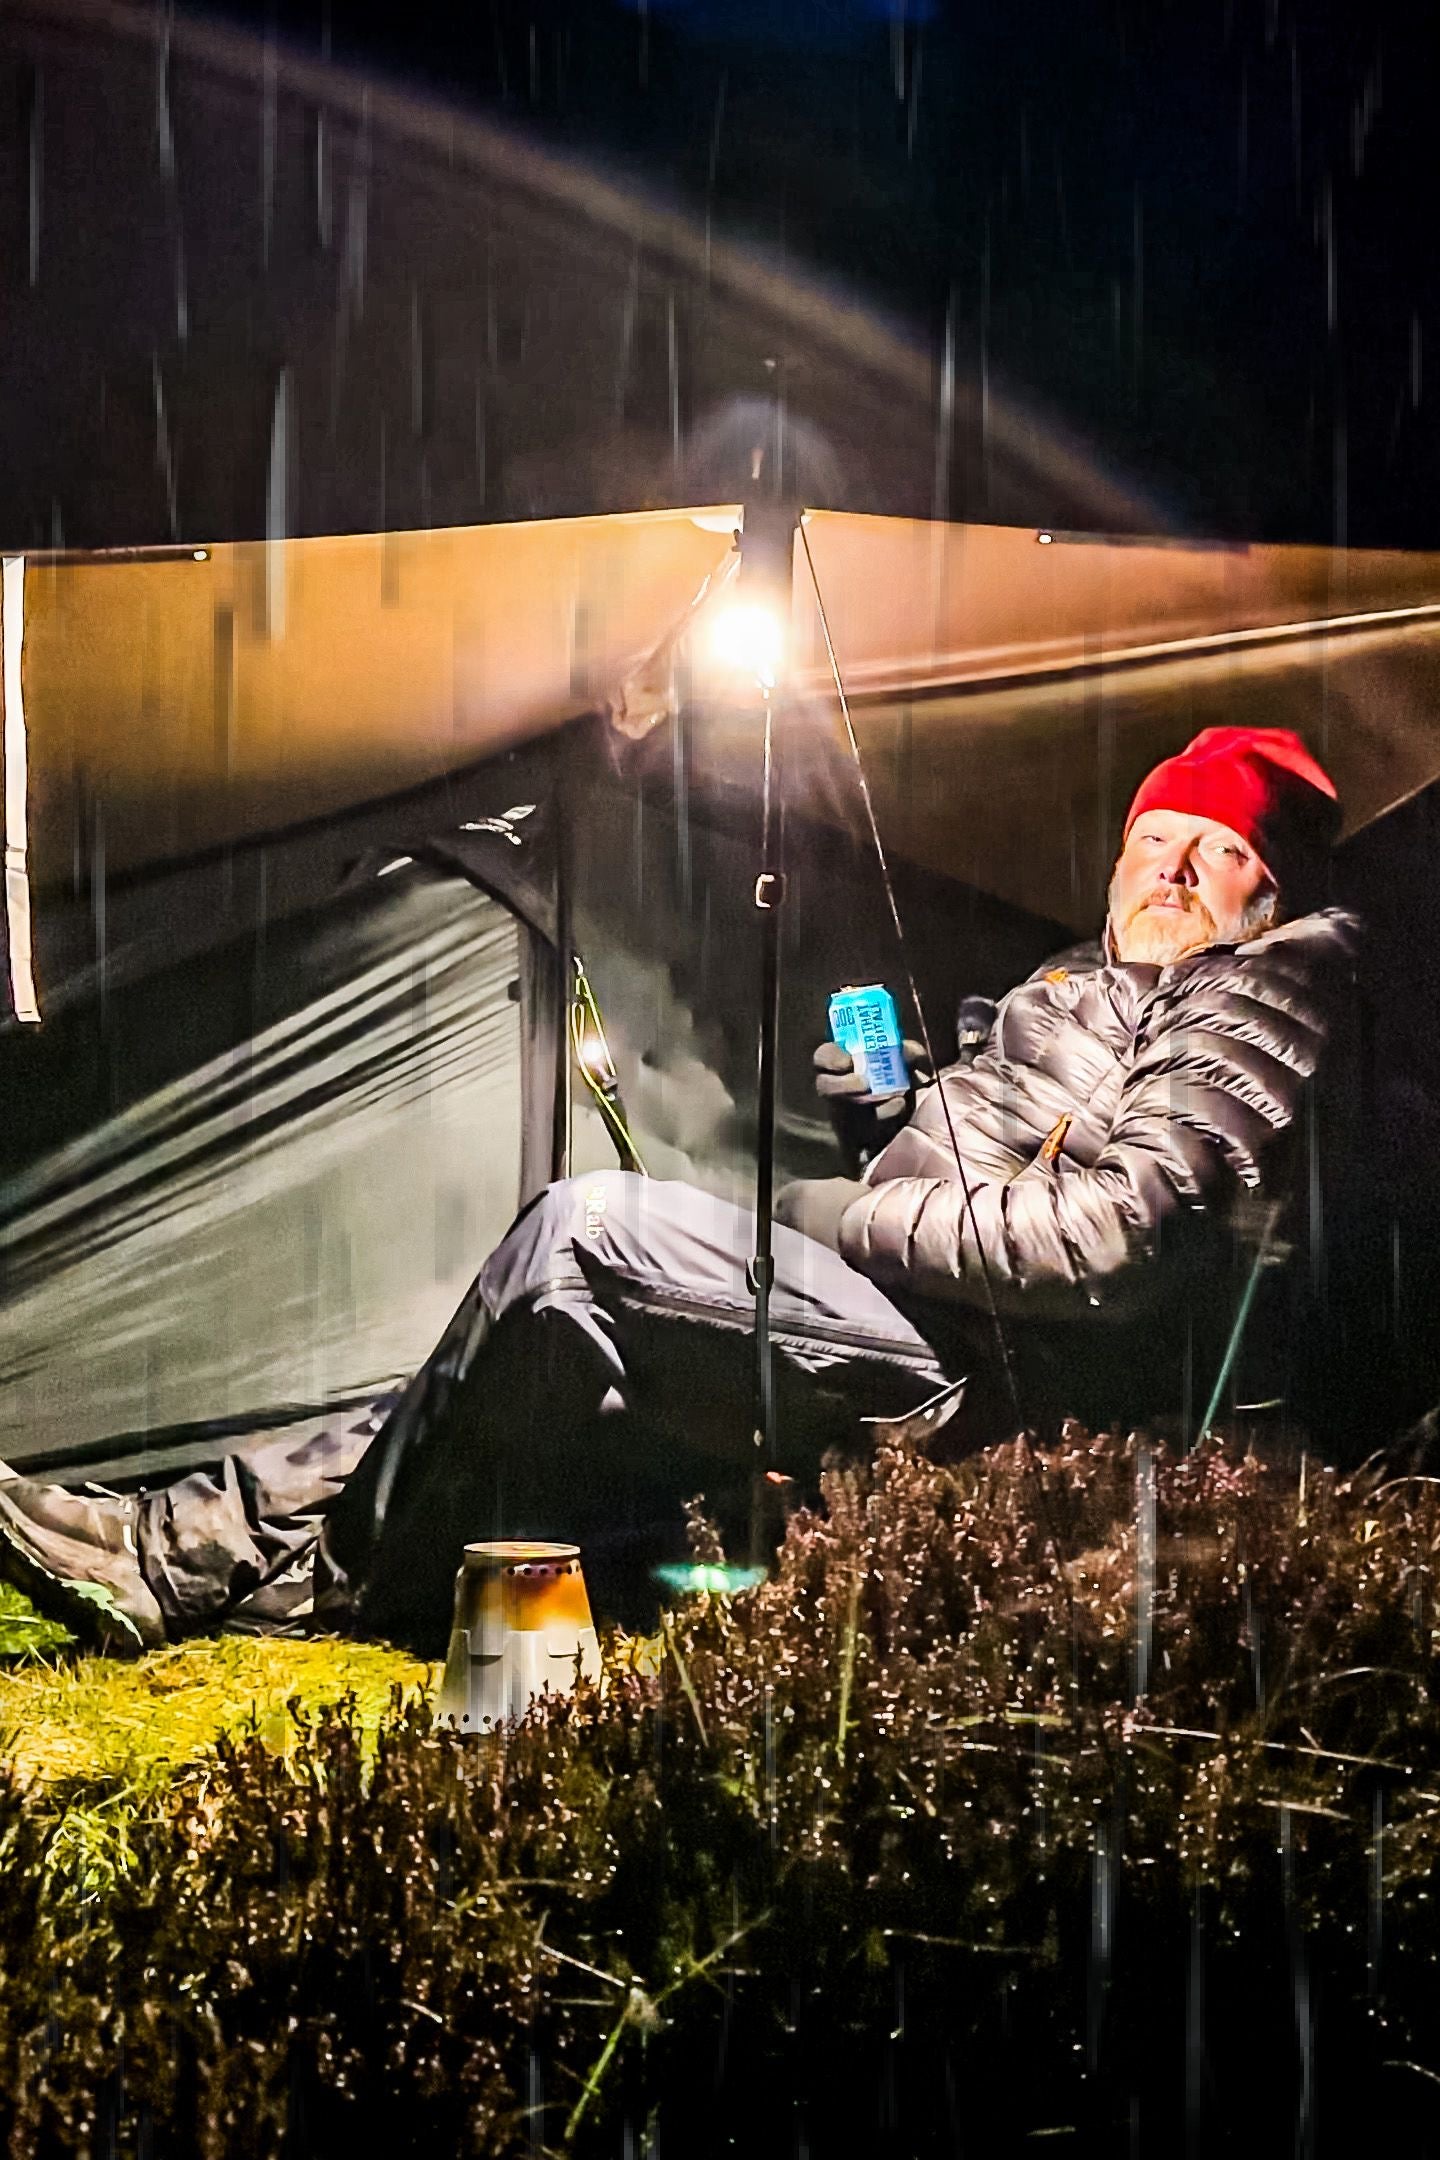 Everything You Need to Know About Winter Camping